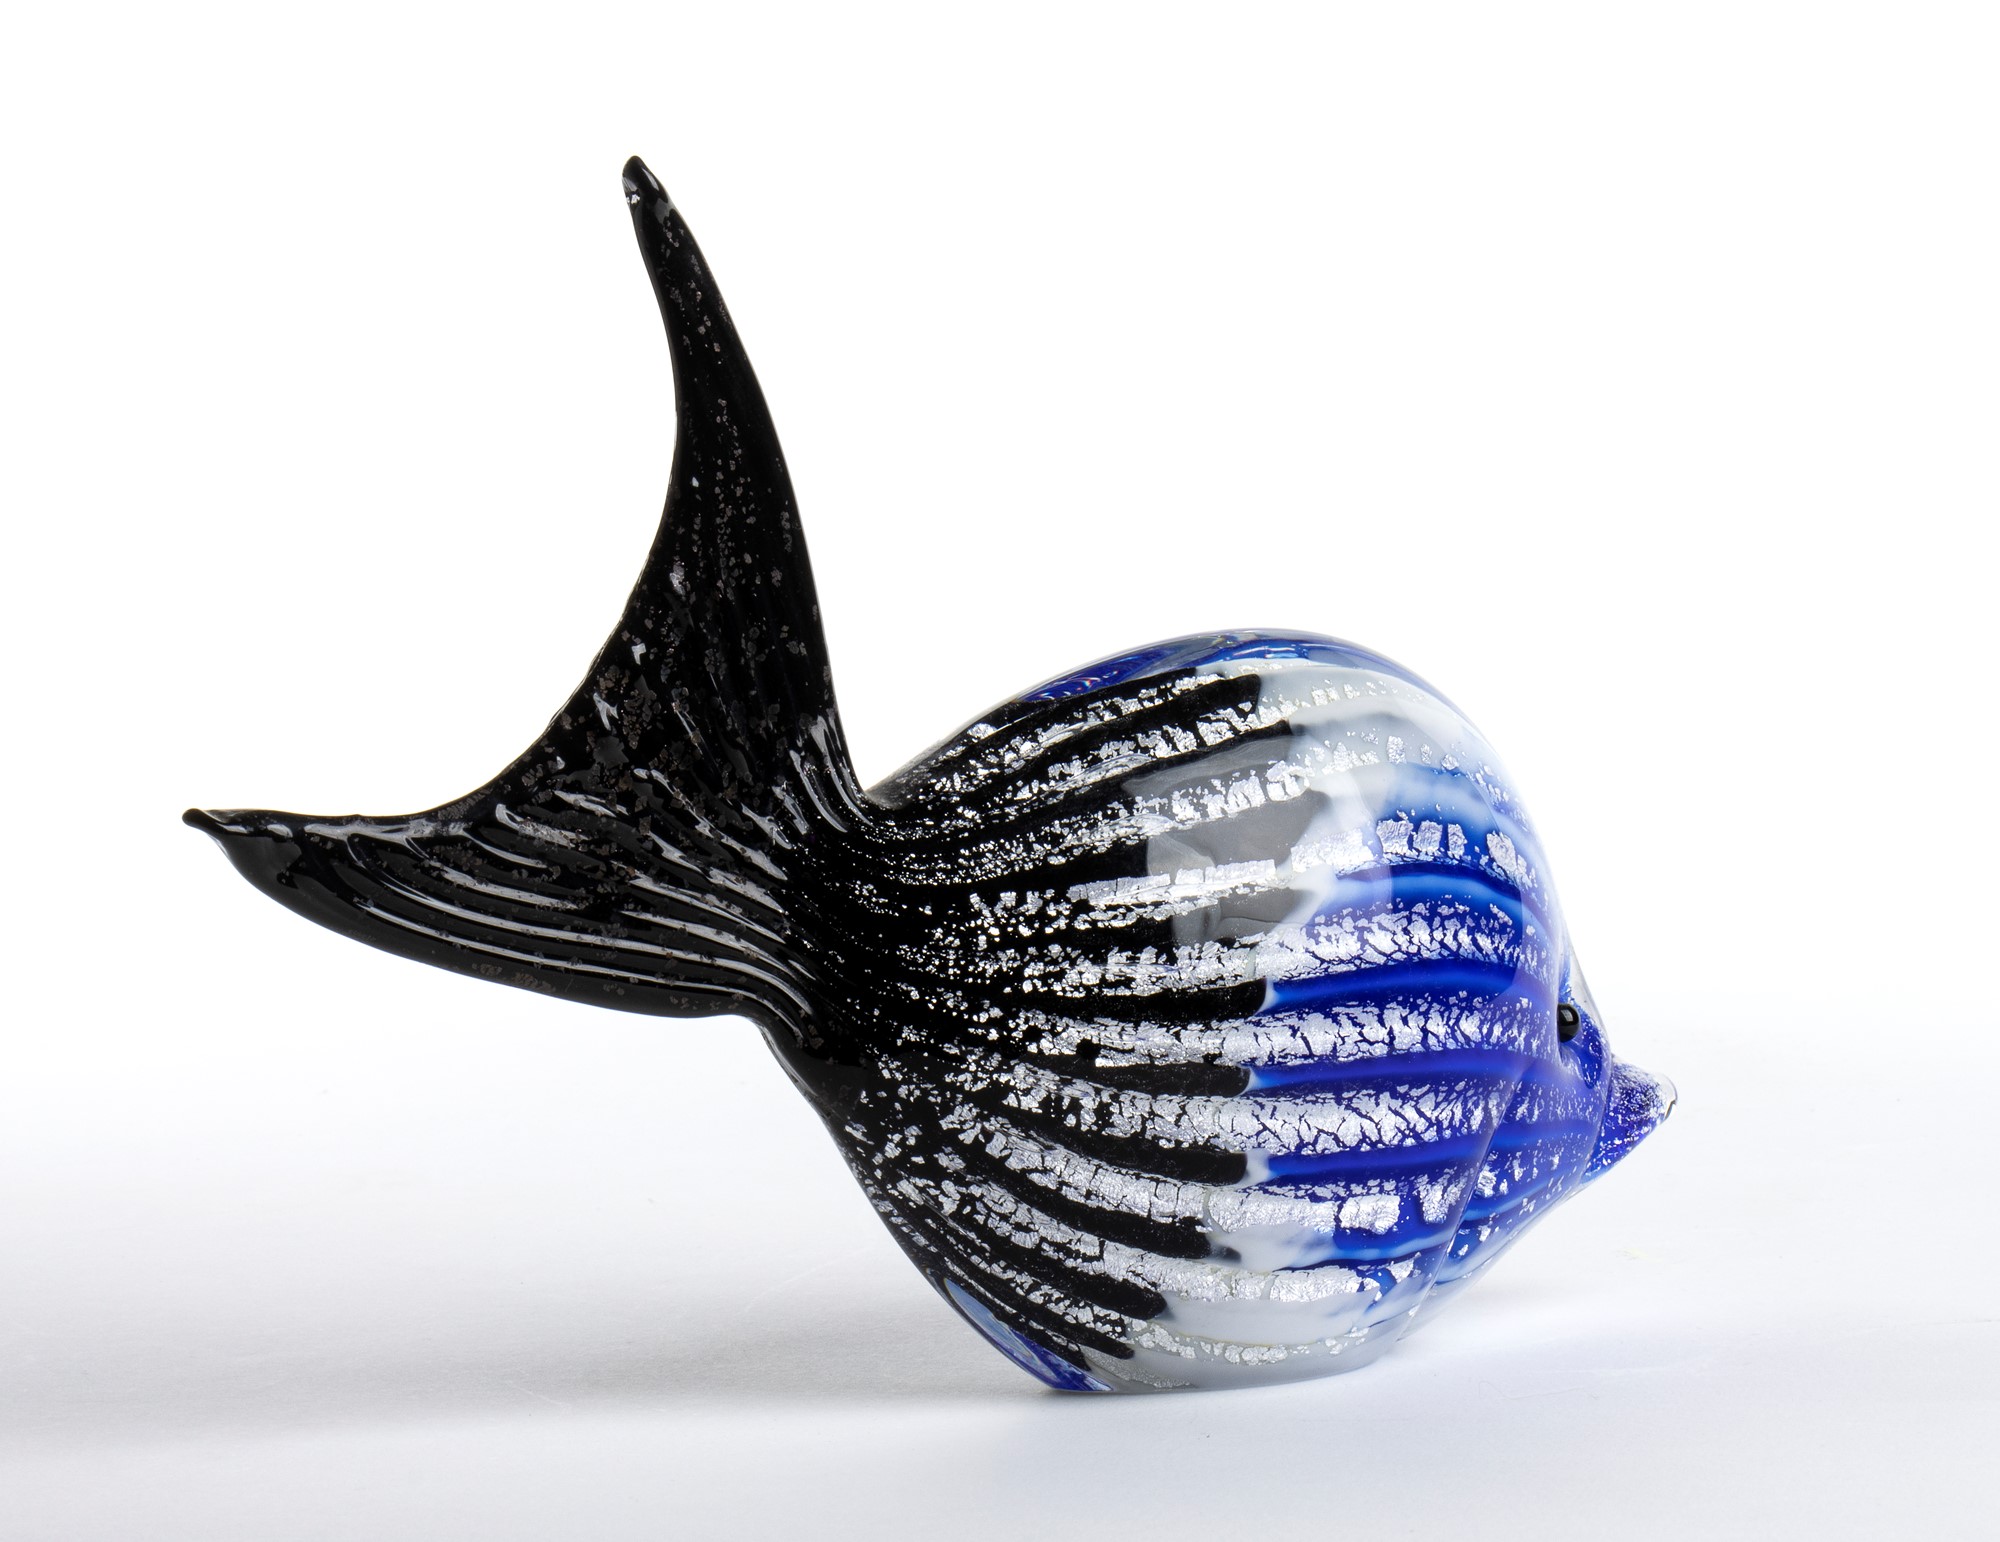 Small fish-shaped sculpture in Murano glass - Image 9 of 11